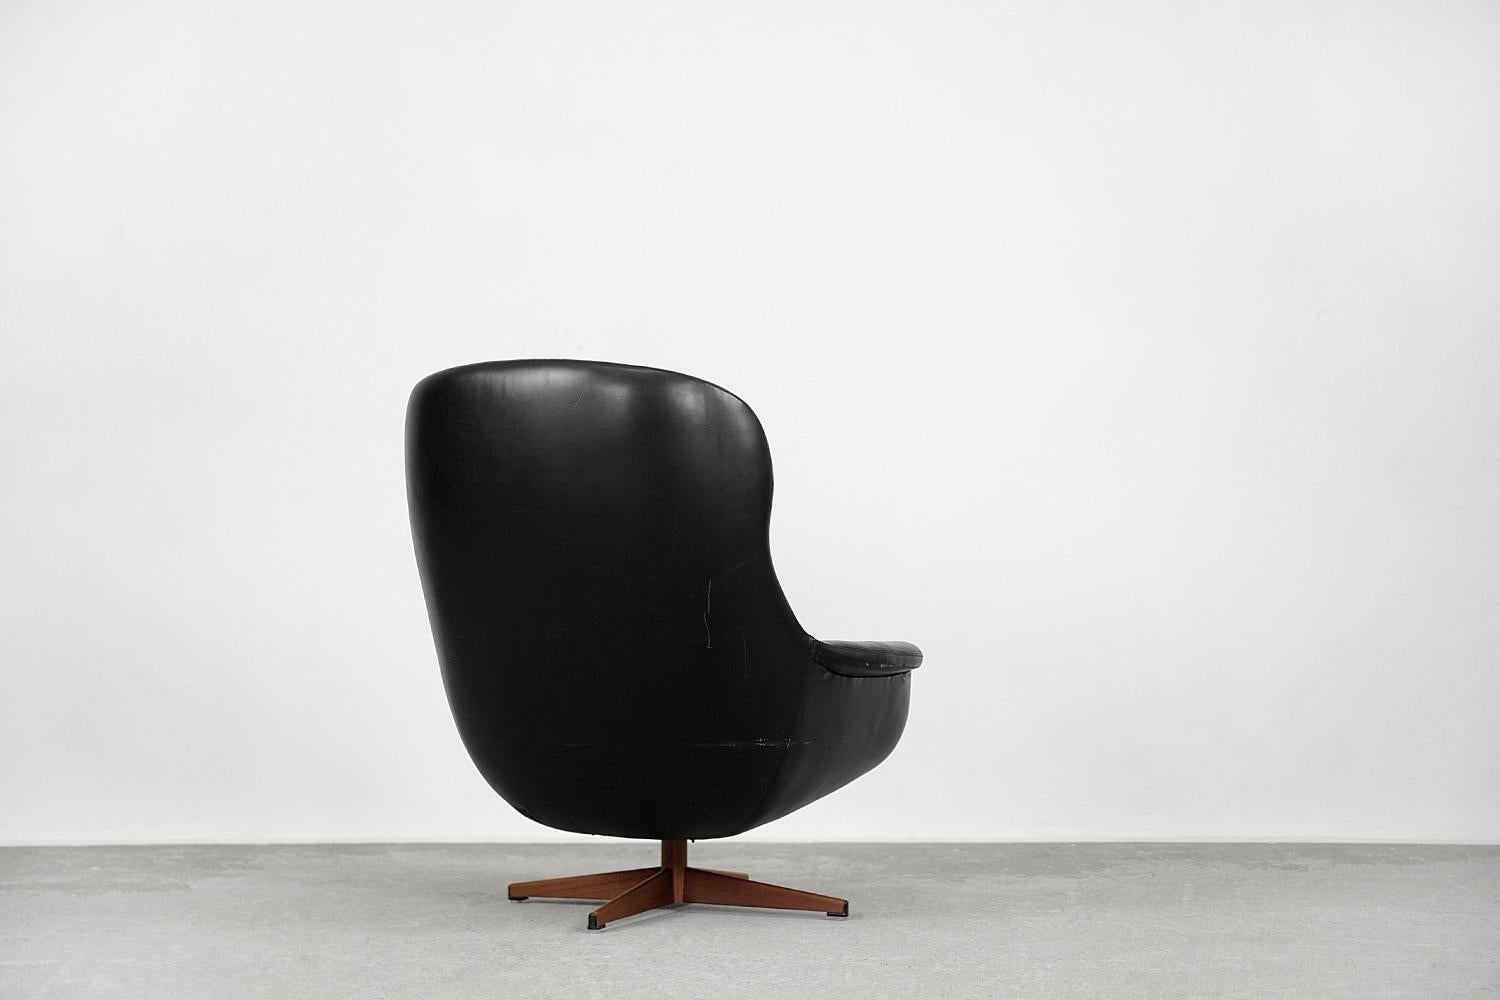 Vintage Swedish Modernist Leather Swivel Lounge Chair from Selig Imperial, 1970s For Sale 2